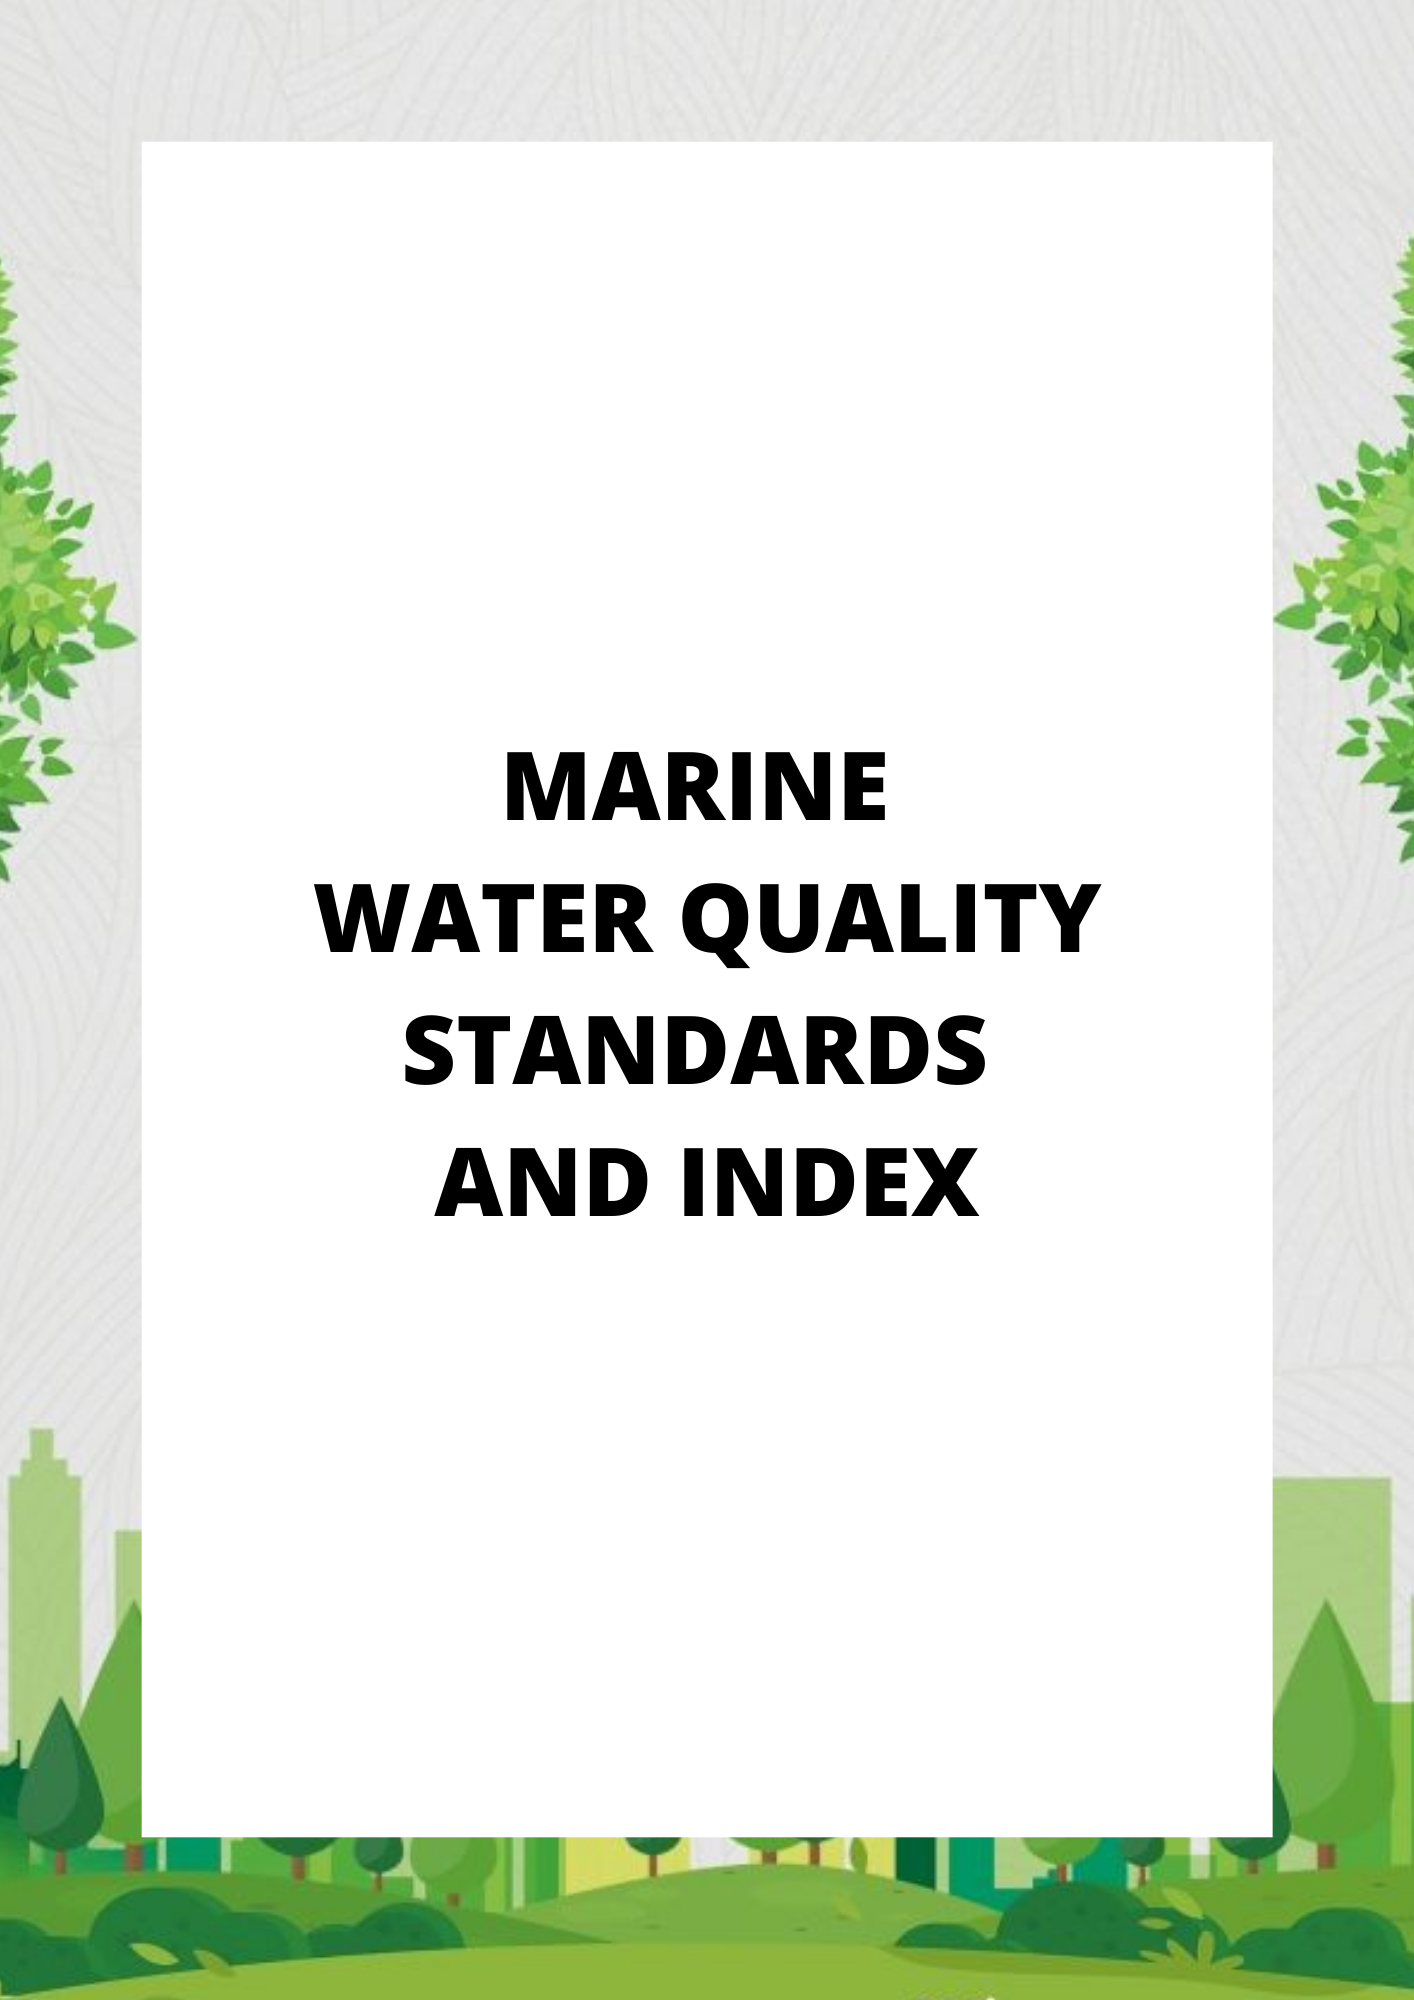 Marine Water Quality Standards and Index